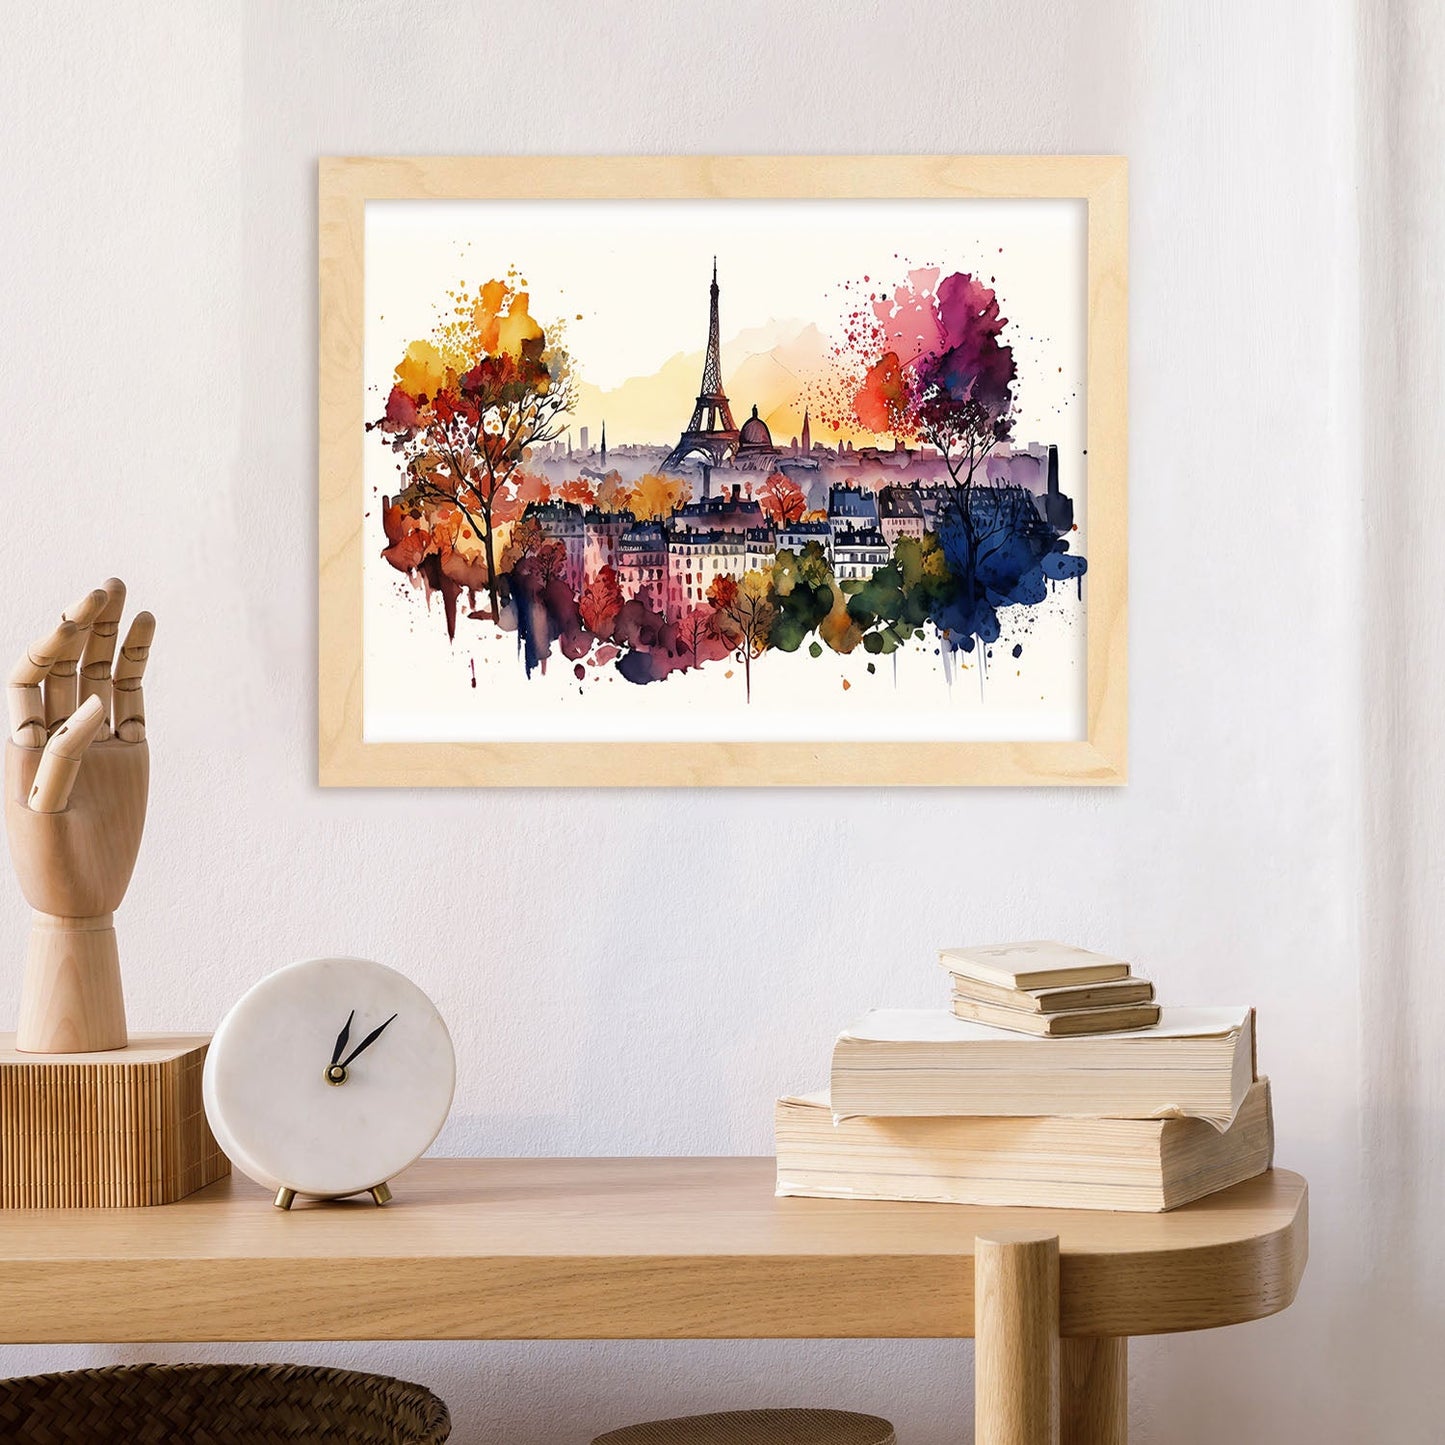 Nacnic watercolor of a skyline of the city of paris. Aesthetic Wall Art Prints for Bedroom or Living Room Design.